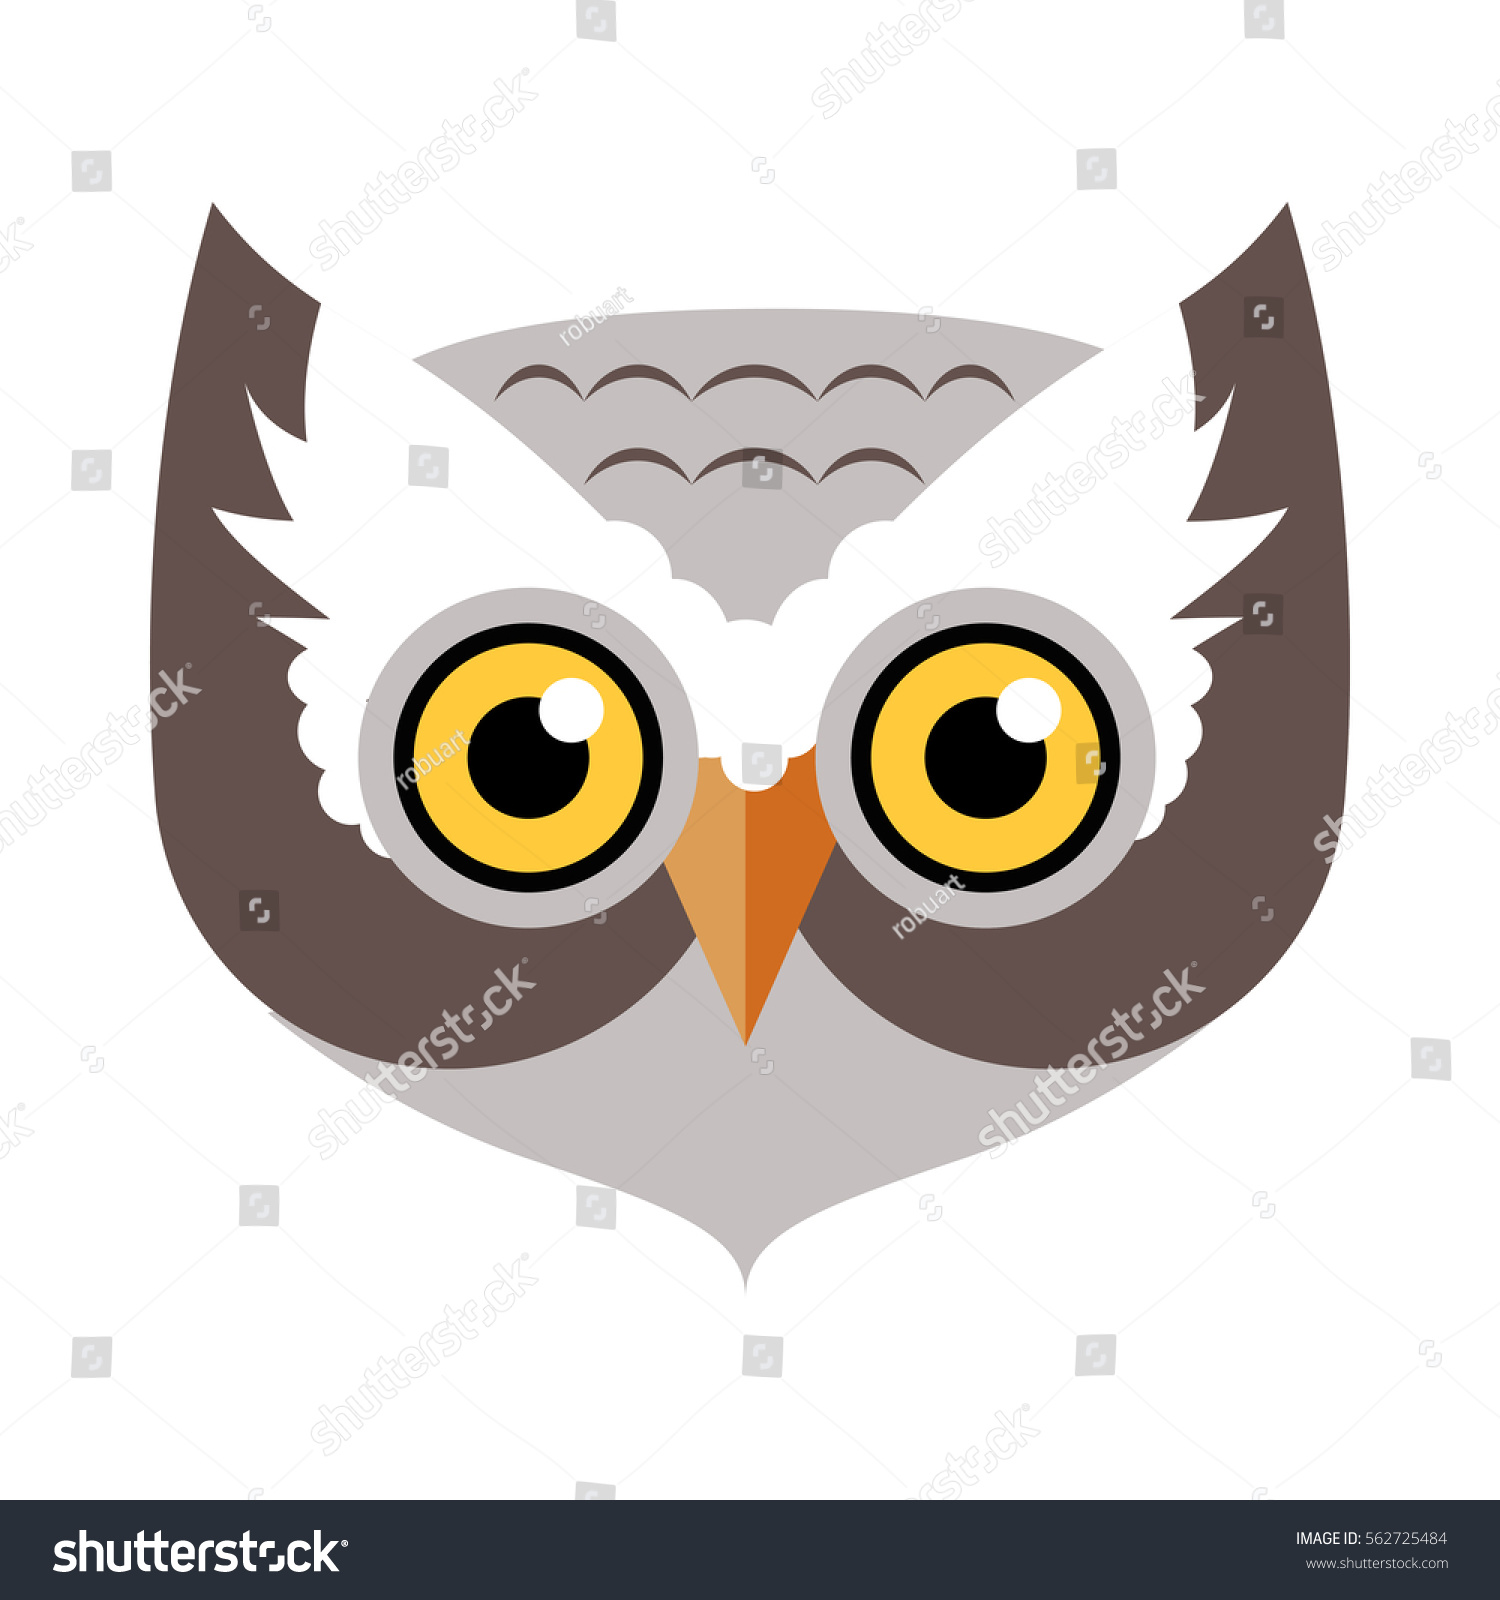 SVG of Owl bird carnival mask vector illustration in flat. Binocular vision, binaural hearing bird. Childish masquerade mask isolated on white. New Year masque for festivals, holiday dress code for kids svg